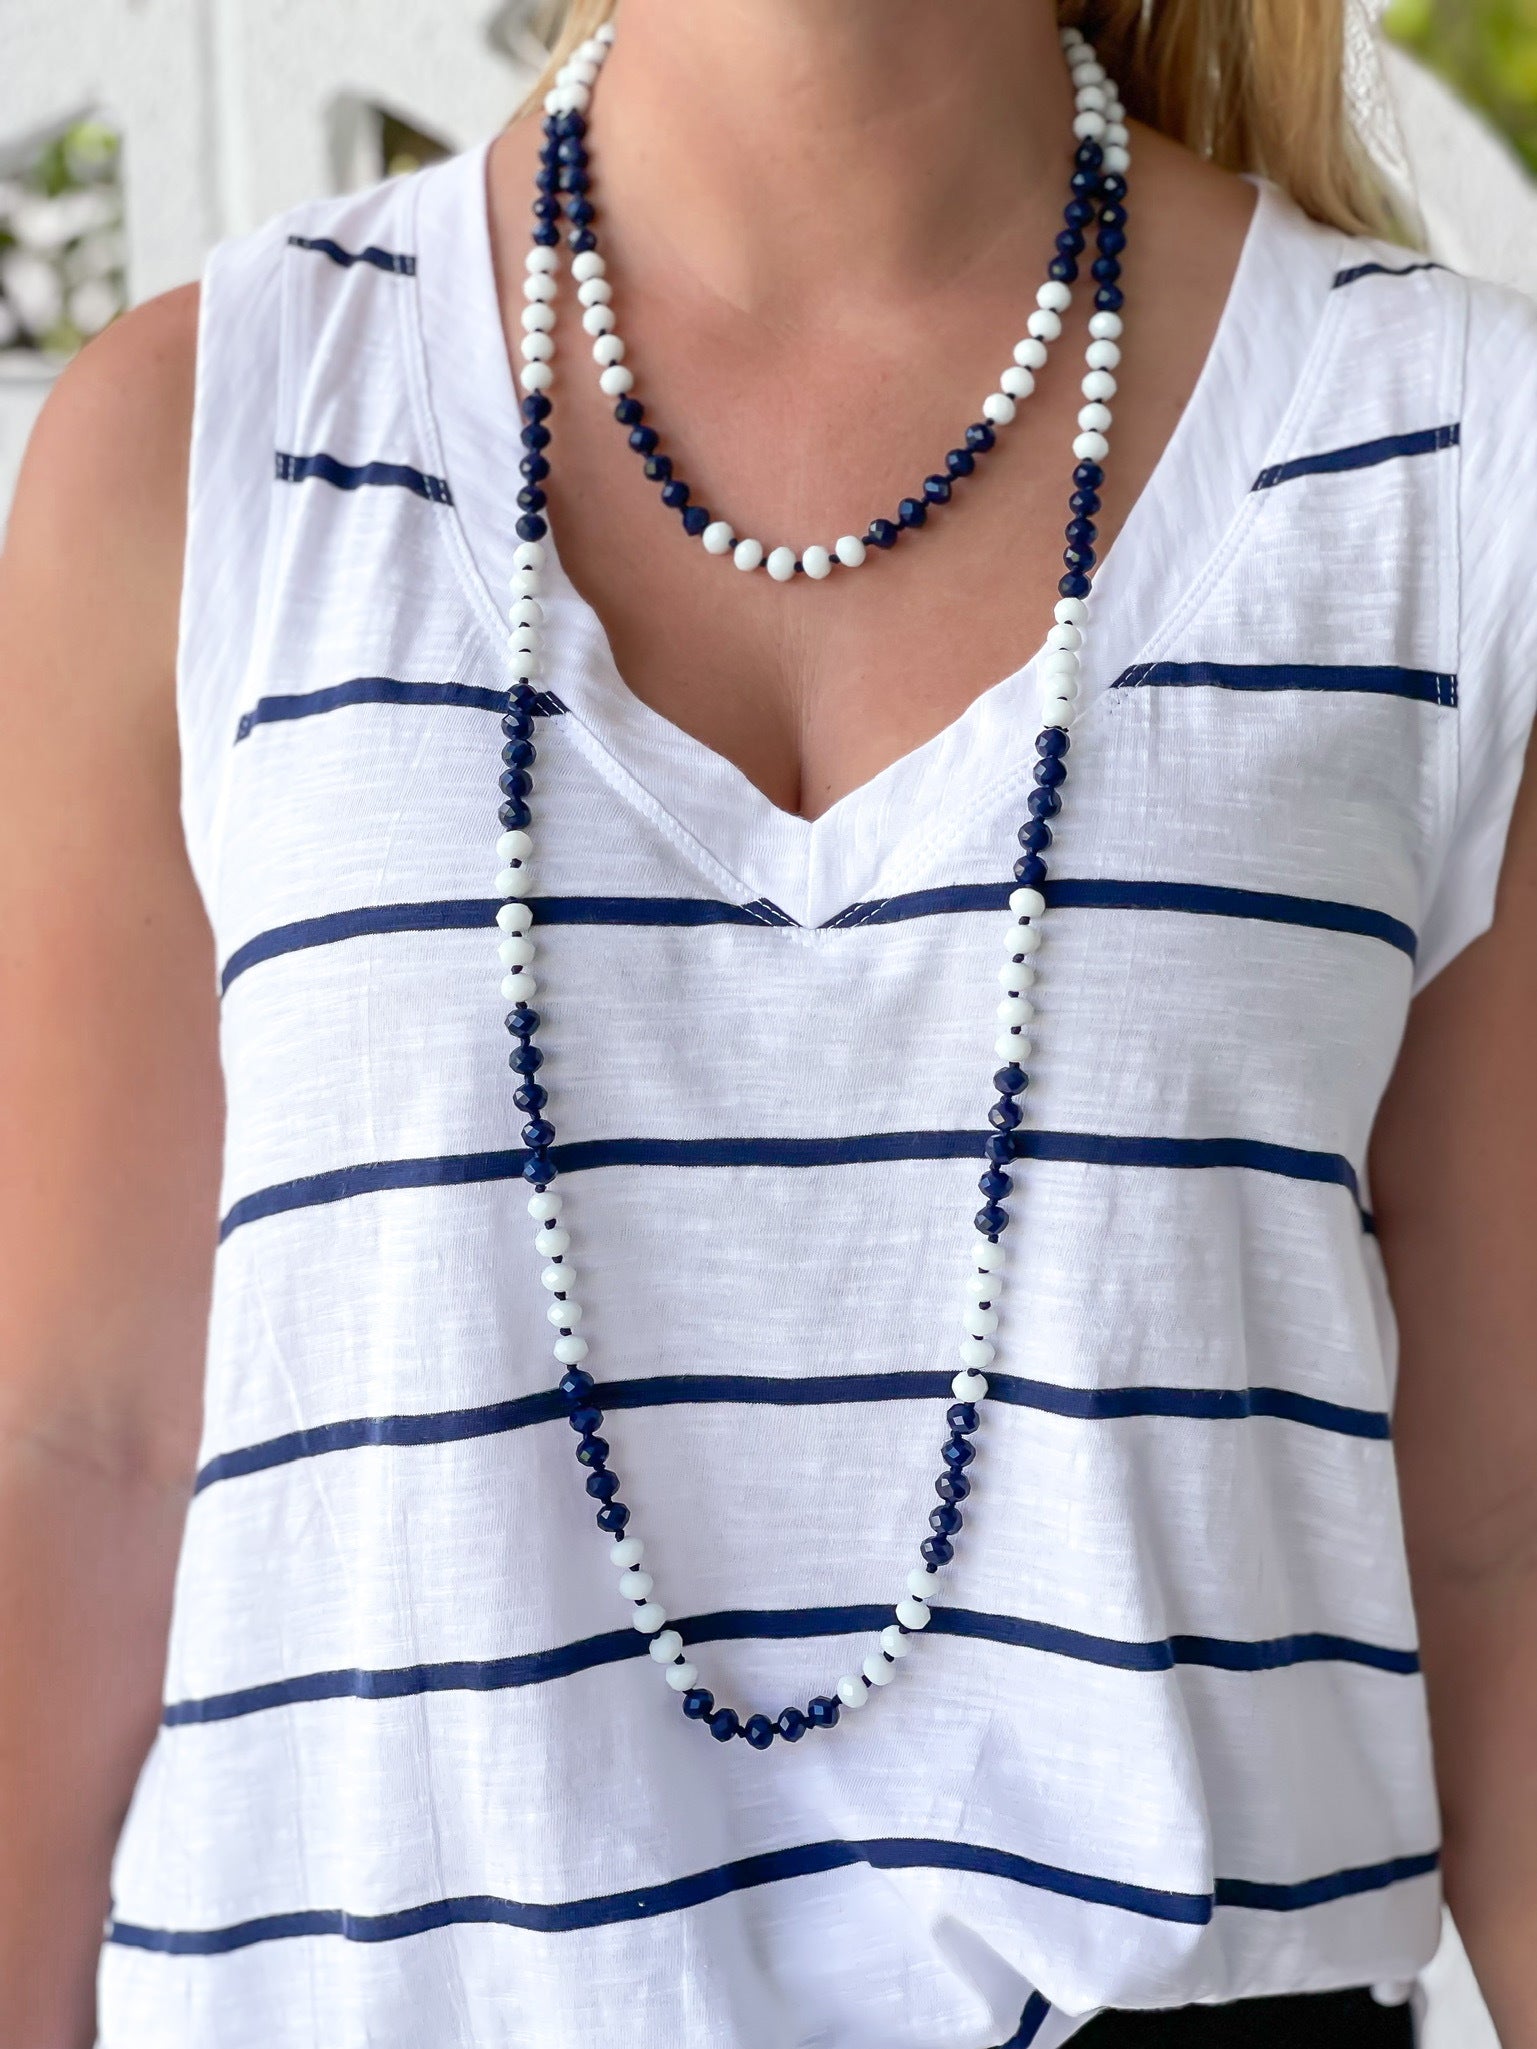 Endless Beaded Long Necklace - Navy Blue & White